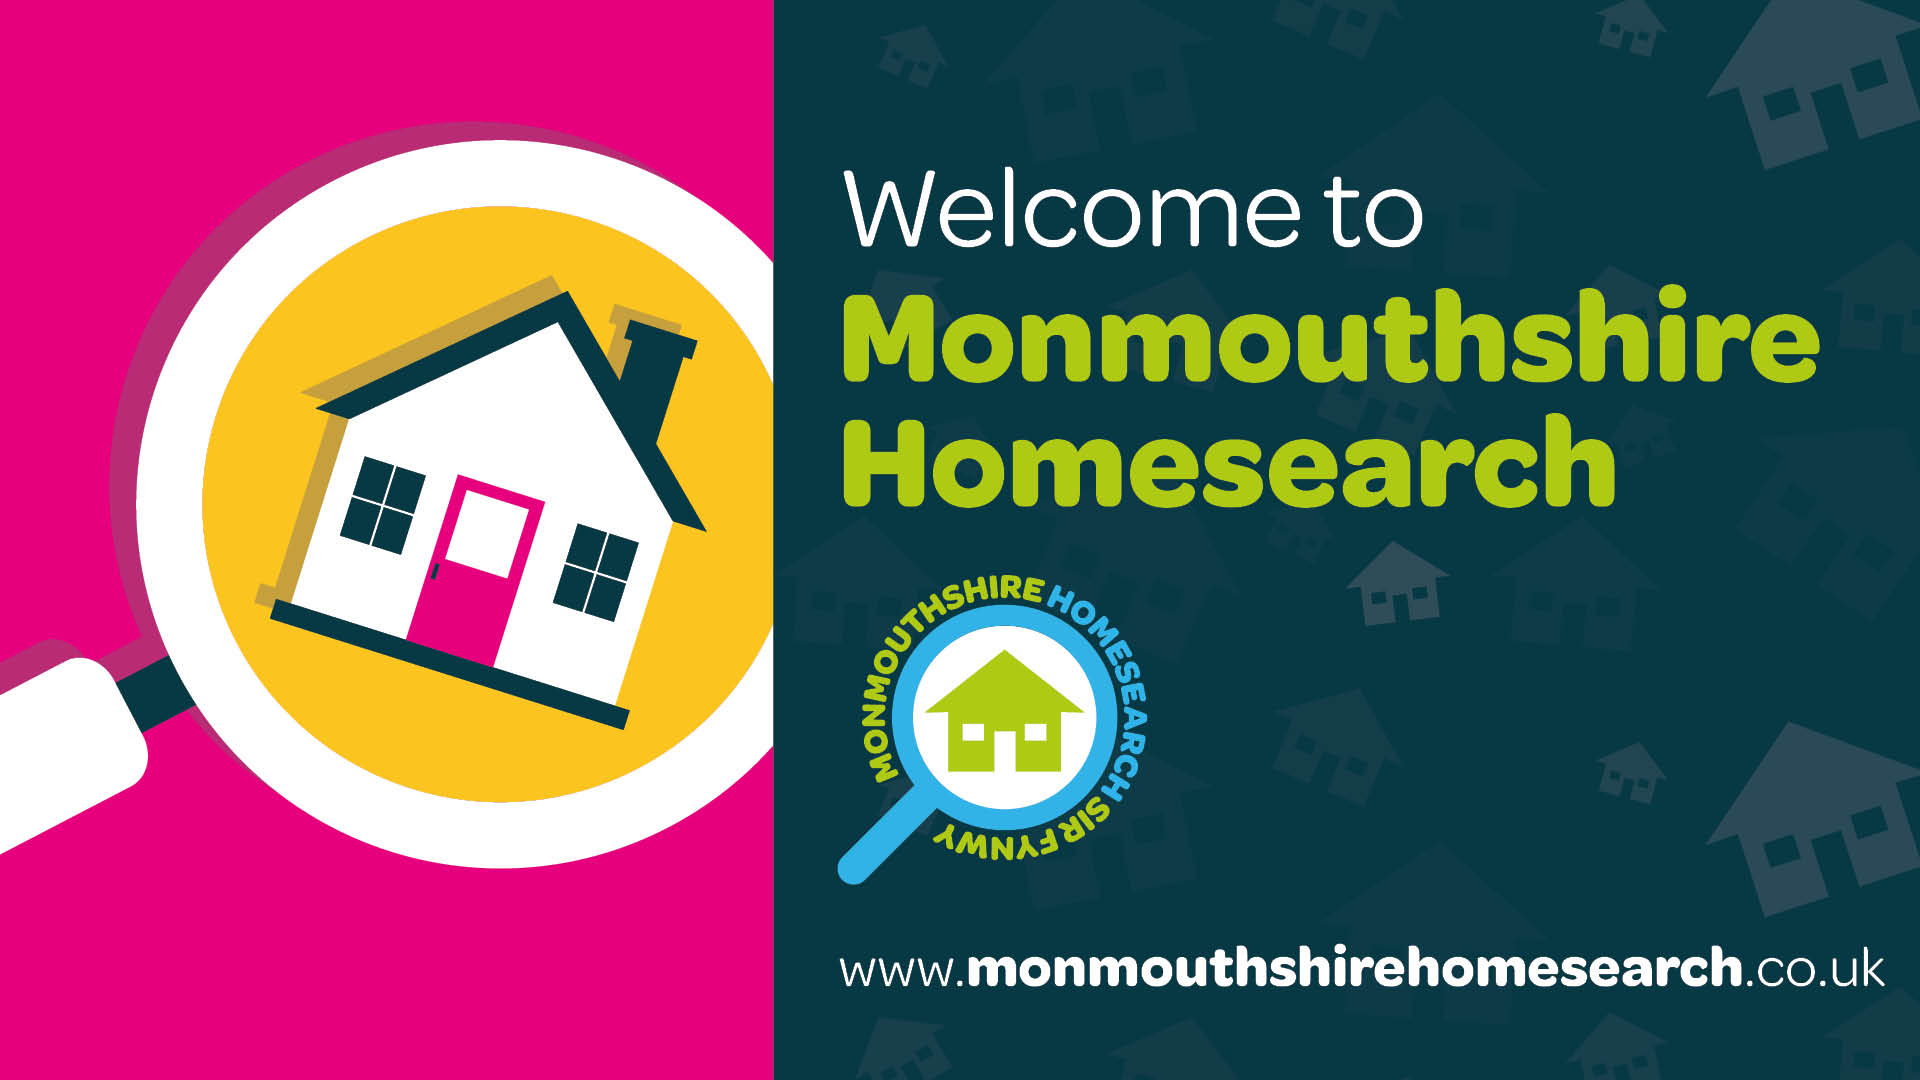 Welcome to Monmouthshire Homesearch thumbnail